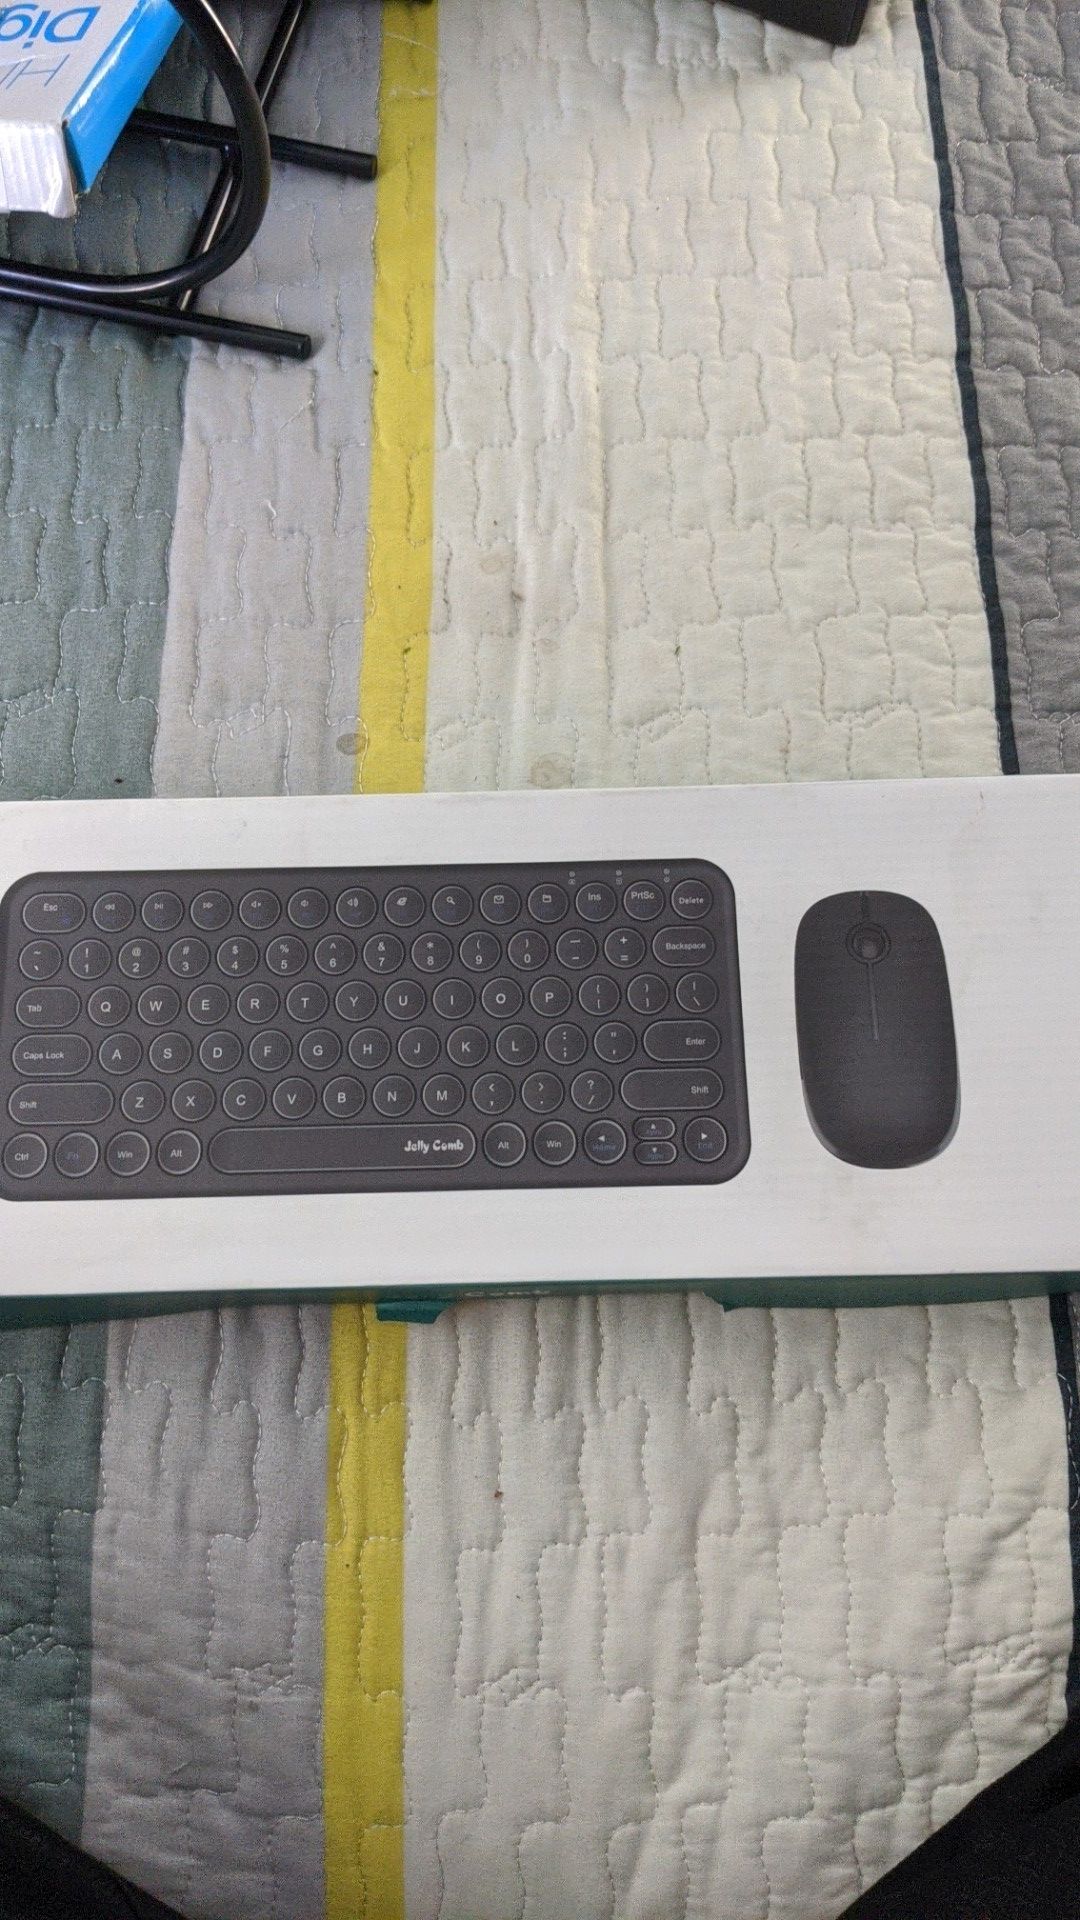 USB wireless keyboard and mouse combo